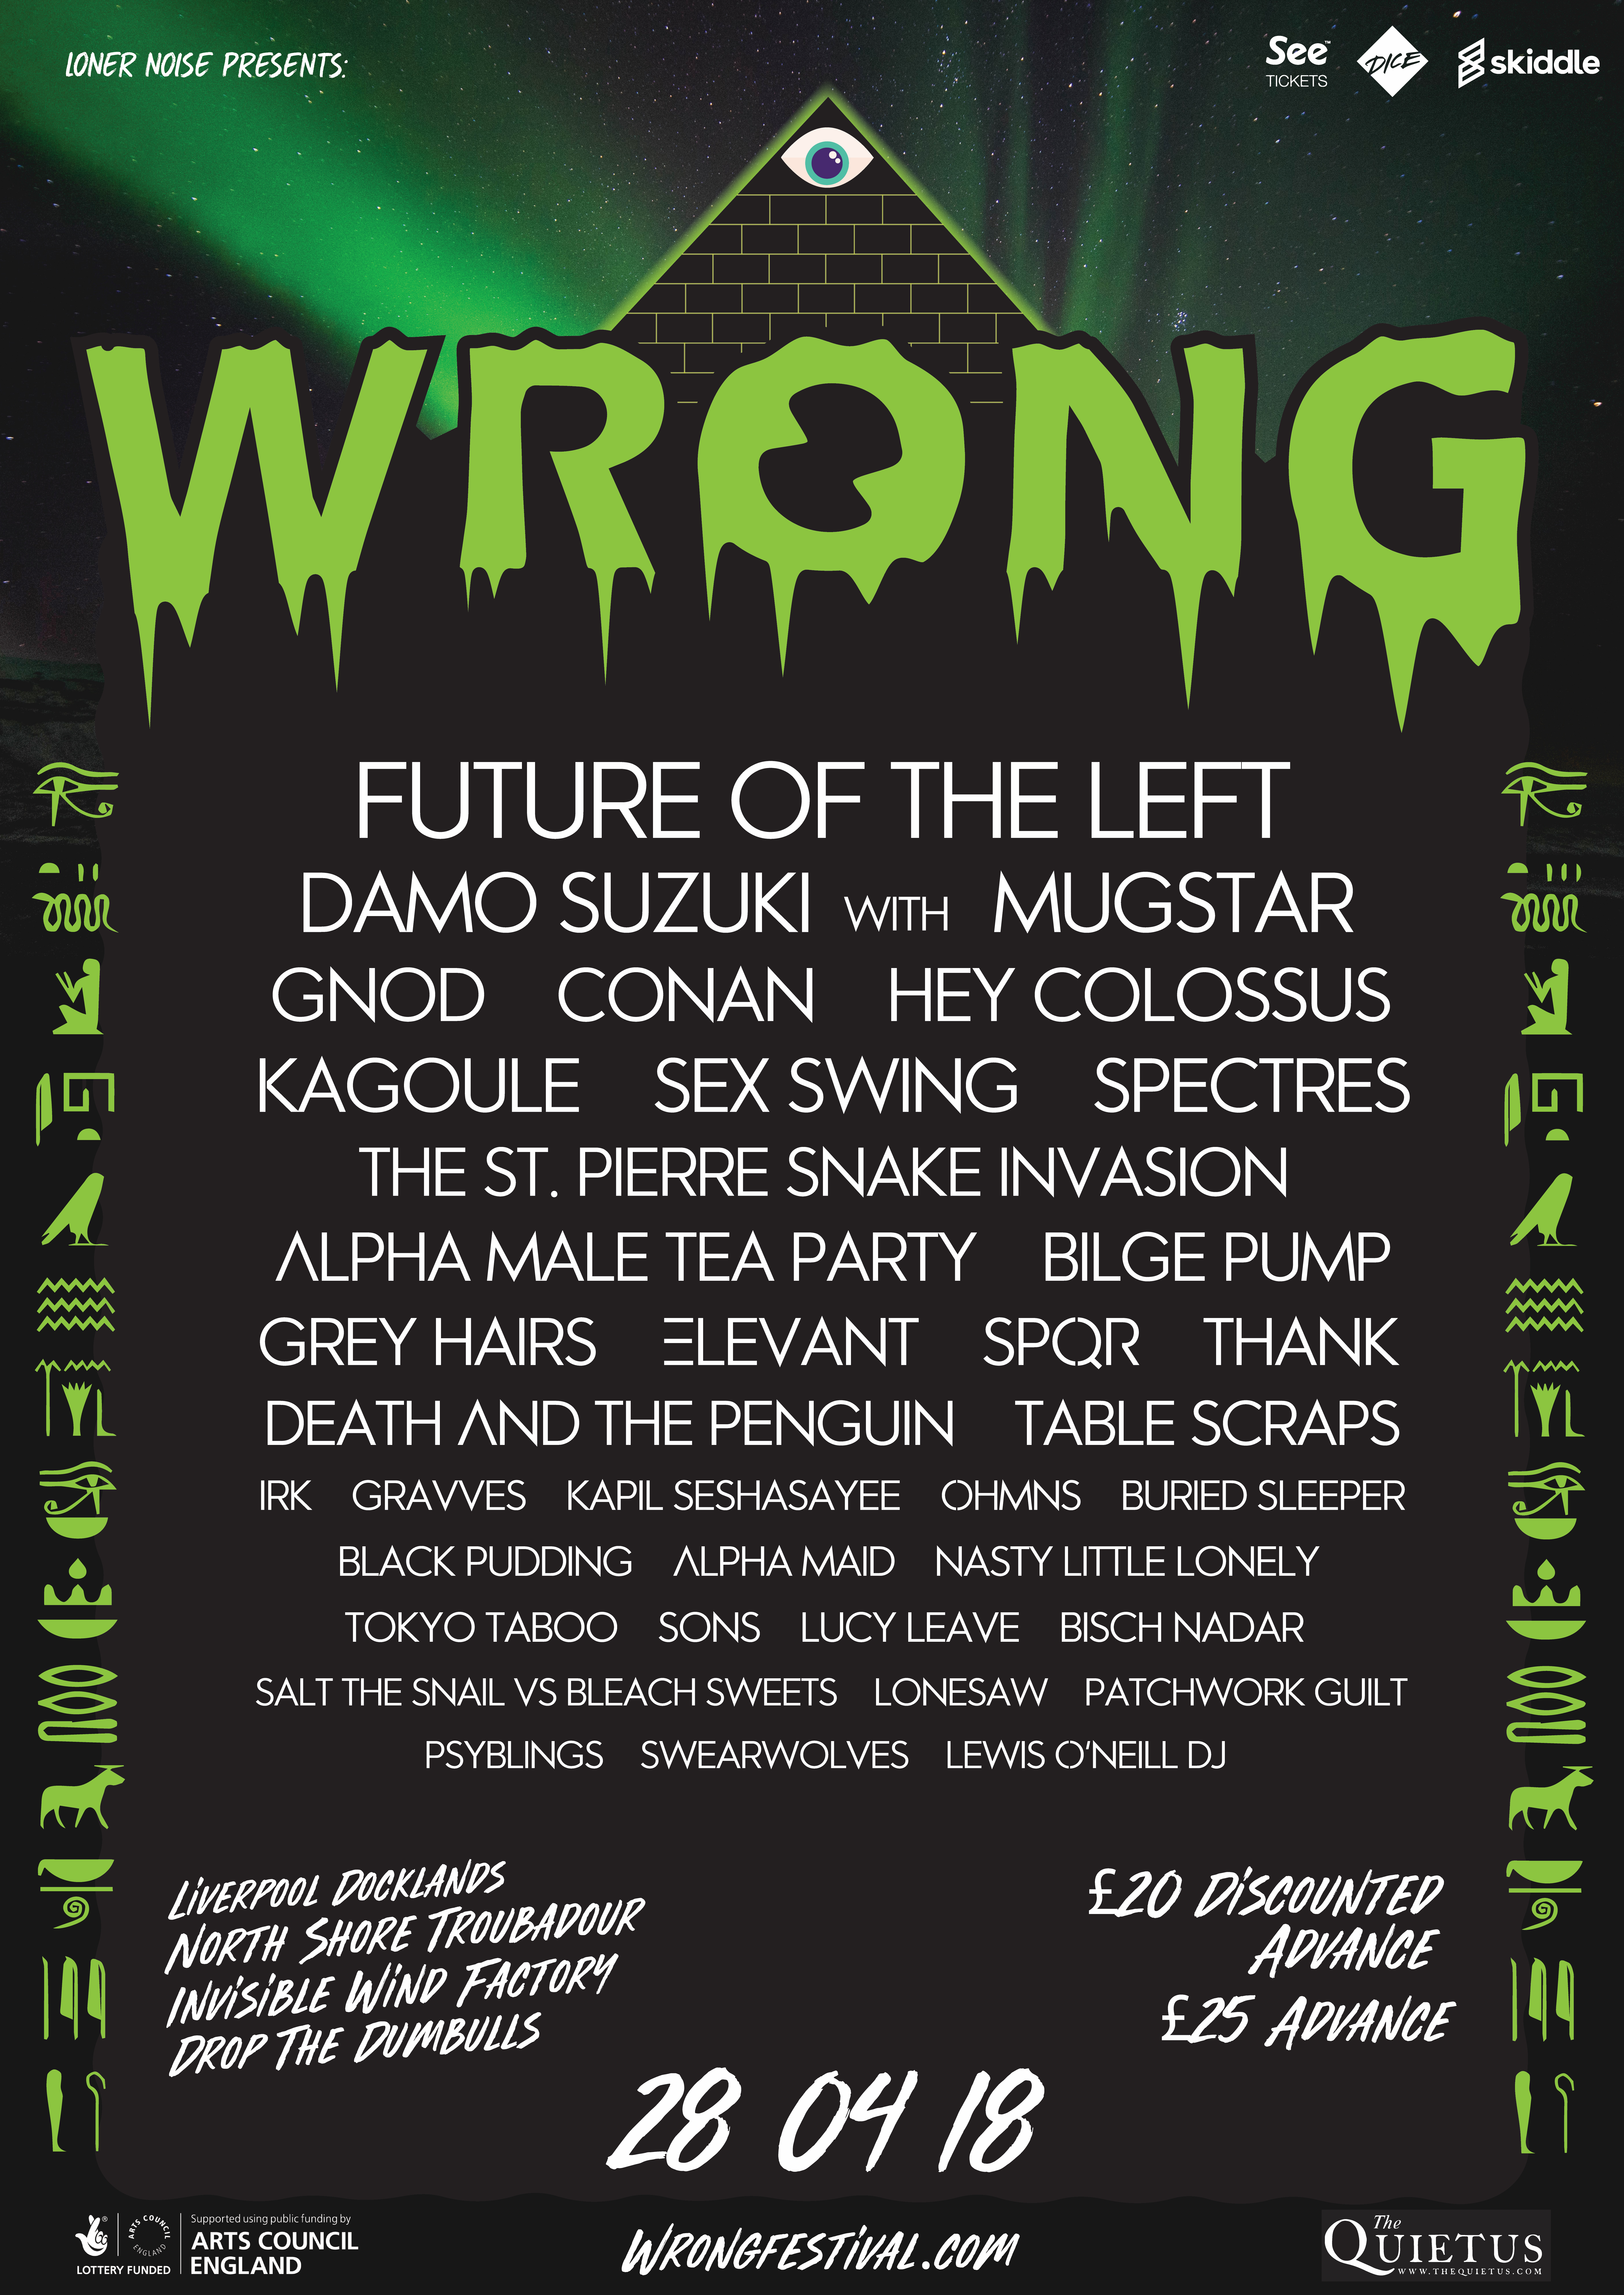 WRONG 2018 ANNOUNCES FULL LINEUP

Skiddle | http://skiddle.com/e/13053176

SeeTickets | https://www.seetickets.com/tour/wrong-festival-2018 

Dice | http://dice.fm/event/wrong-festival-28th-apr-various-venues-tickets 

EVENT | https://www.facebook.com/events/1461839880597576/

The Quietus Article | http://thequietus.com/articles/23904-wrong-festival-liverpool-2018-full-line-up-gnod-conan-spectres